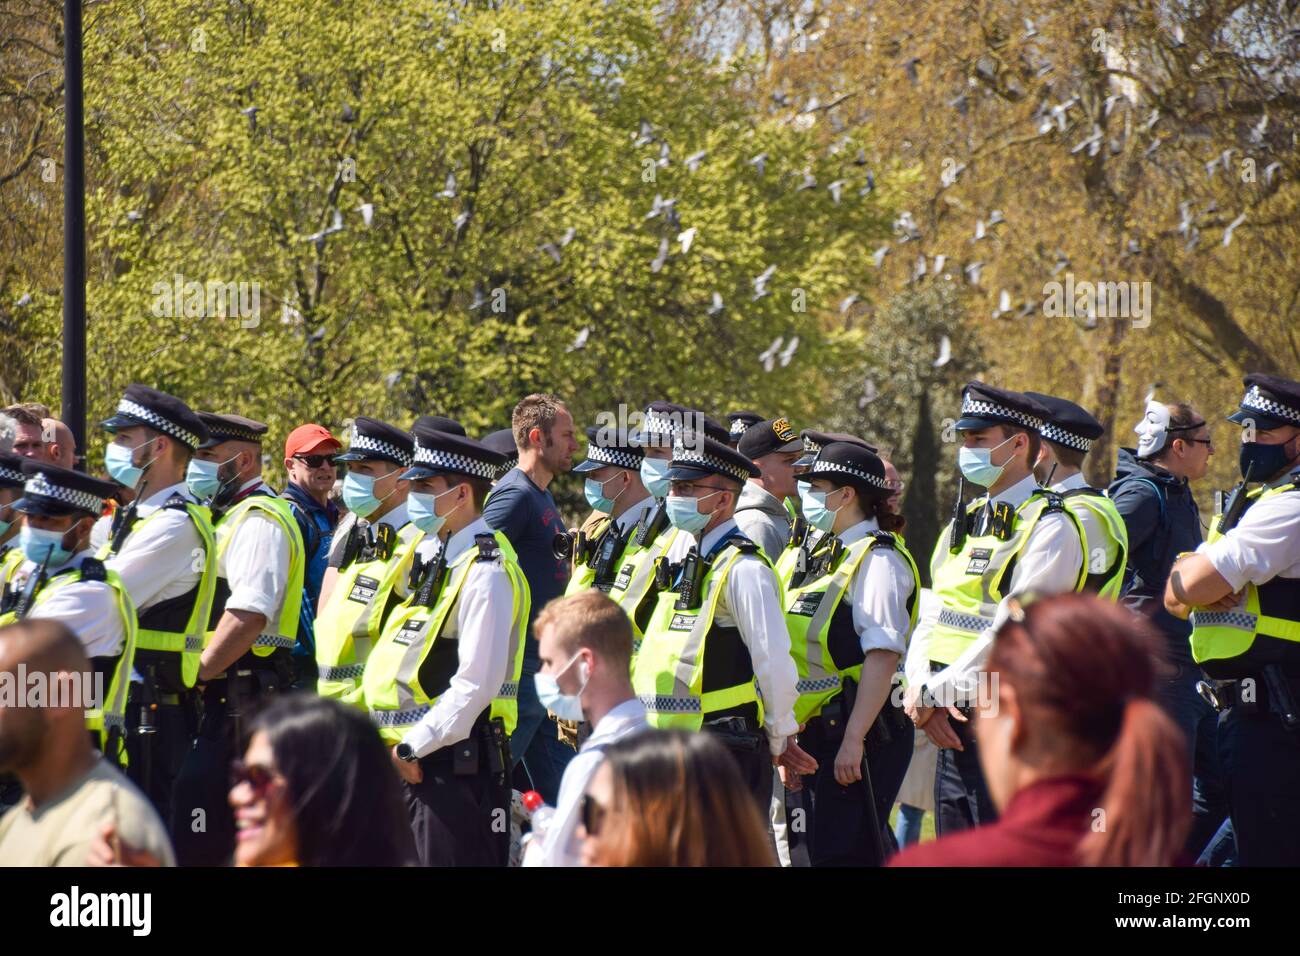 London, United Kingdom. 24th April 2021. Police wearing protective face masks at the anti-lockdown protest. Thousands of people marched through Central London in protest against health passports, protective masks, Covid vaccines and lockdown restrictions. Stock Photo